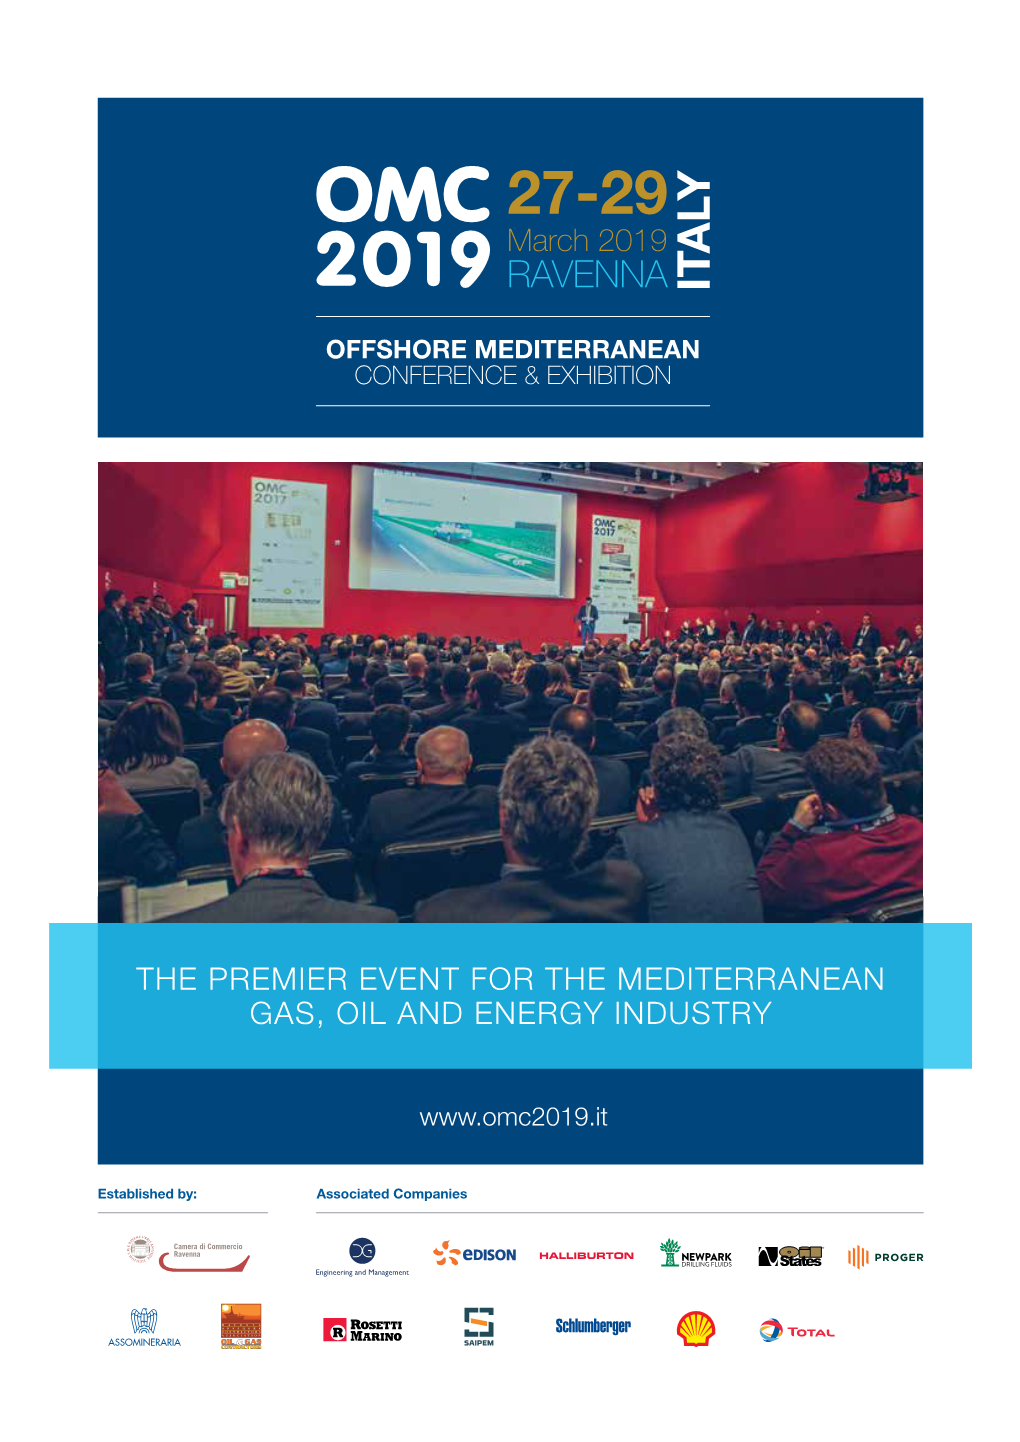 The Premier Event for the Mediterranean Gas, Oil and Energy Industry